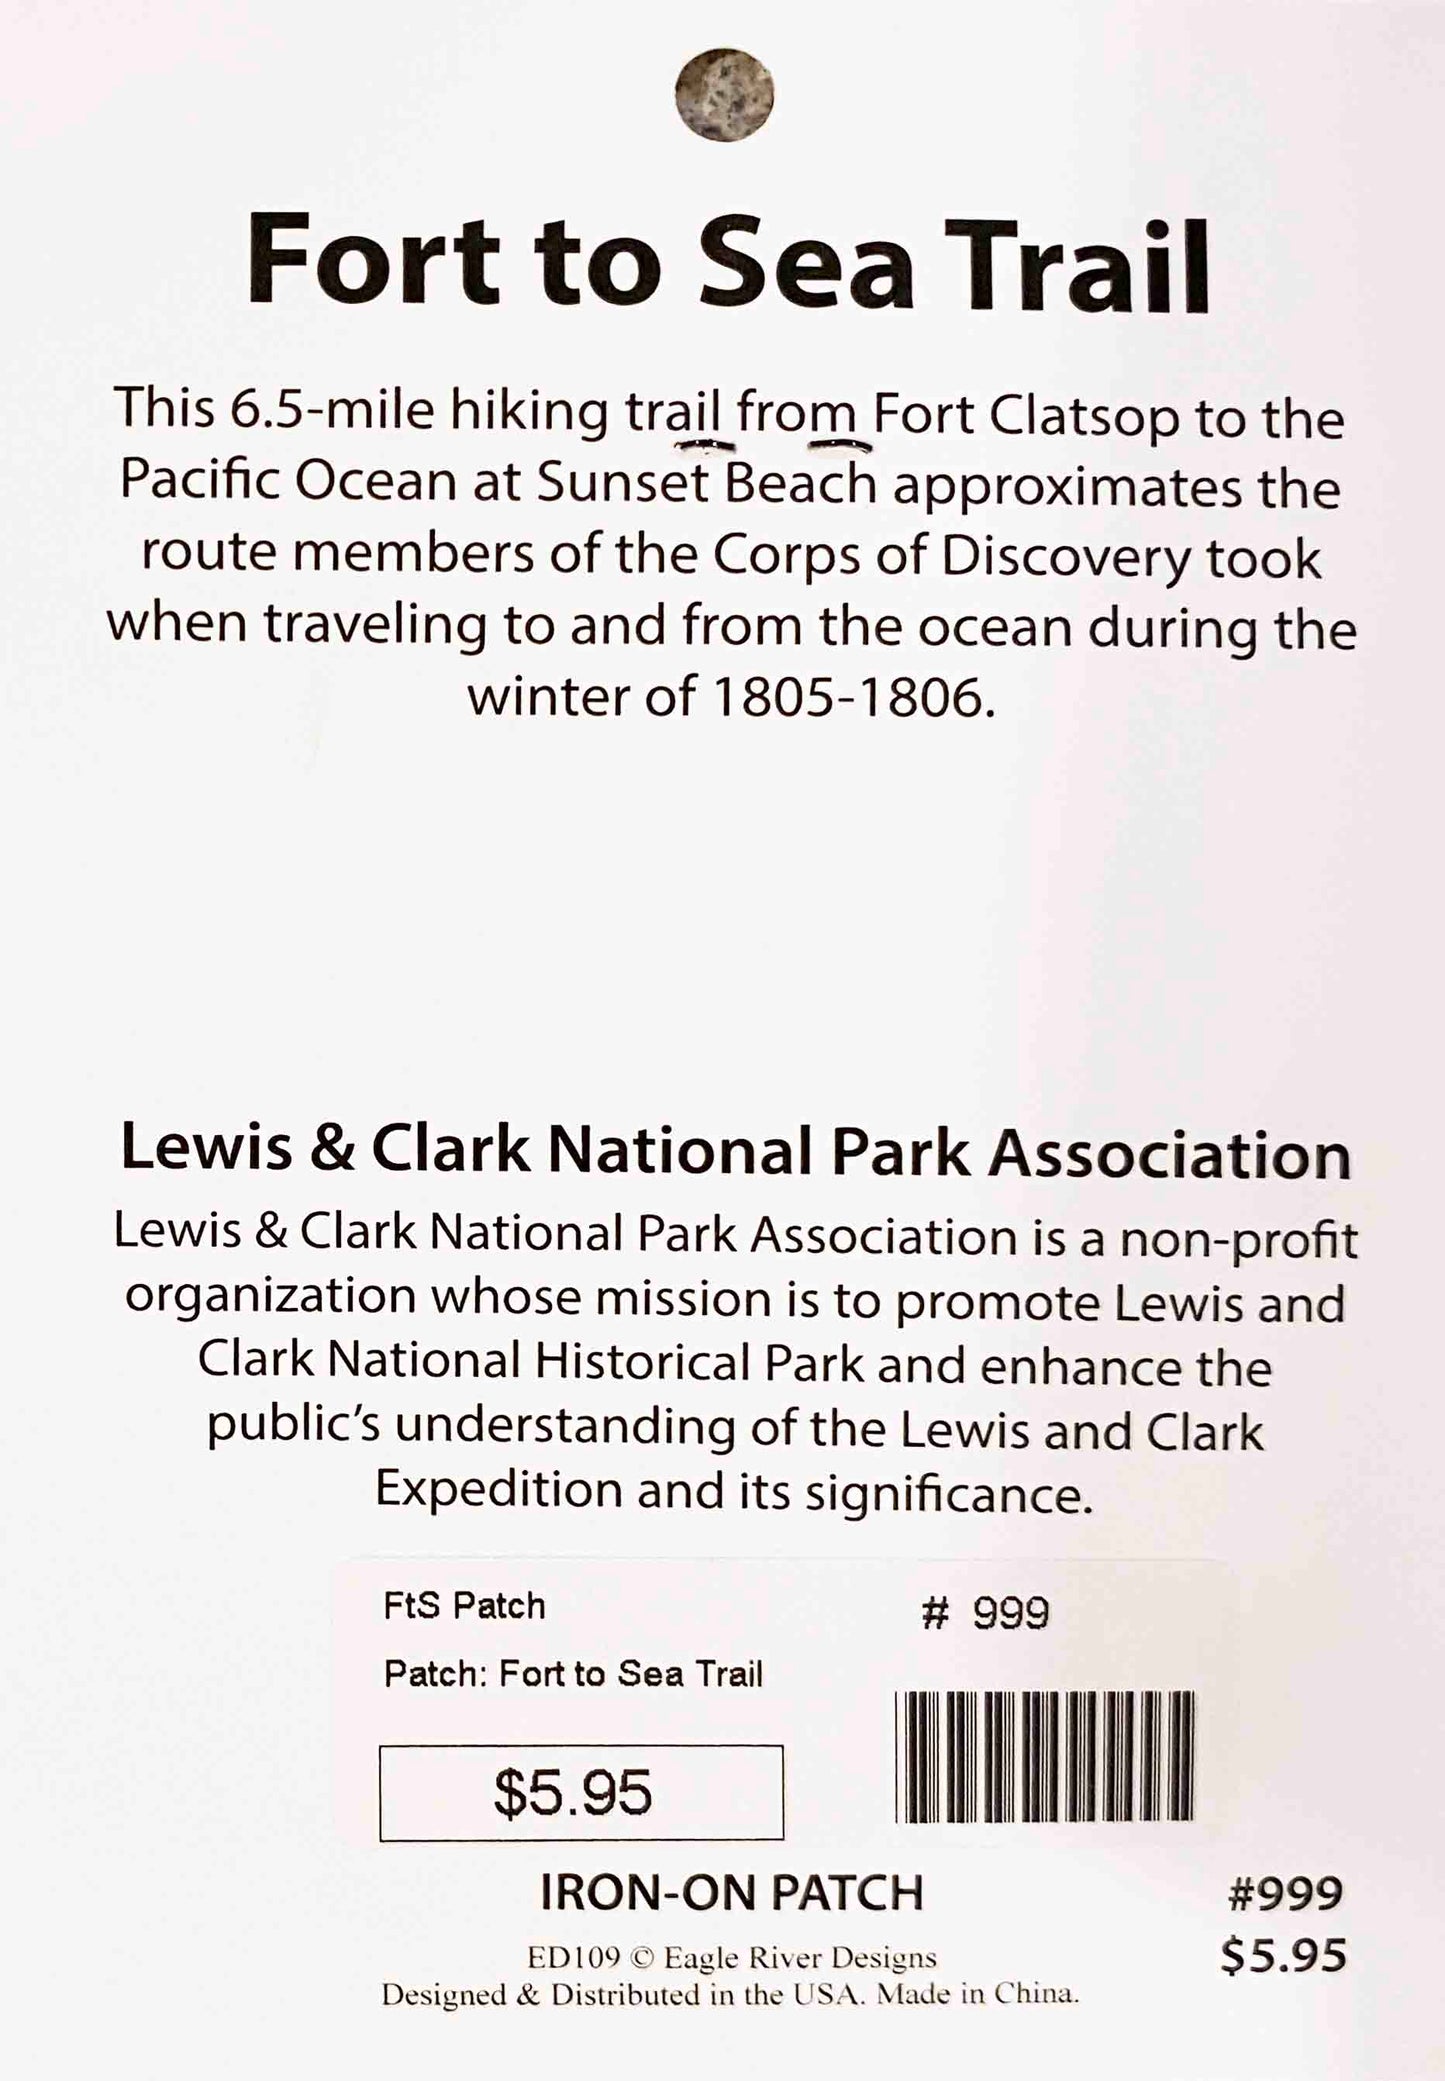 Patch: Fort to Sea Trail